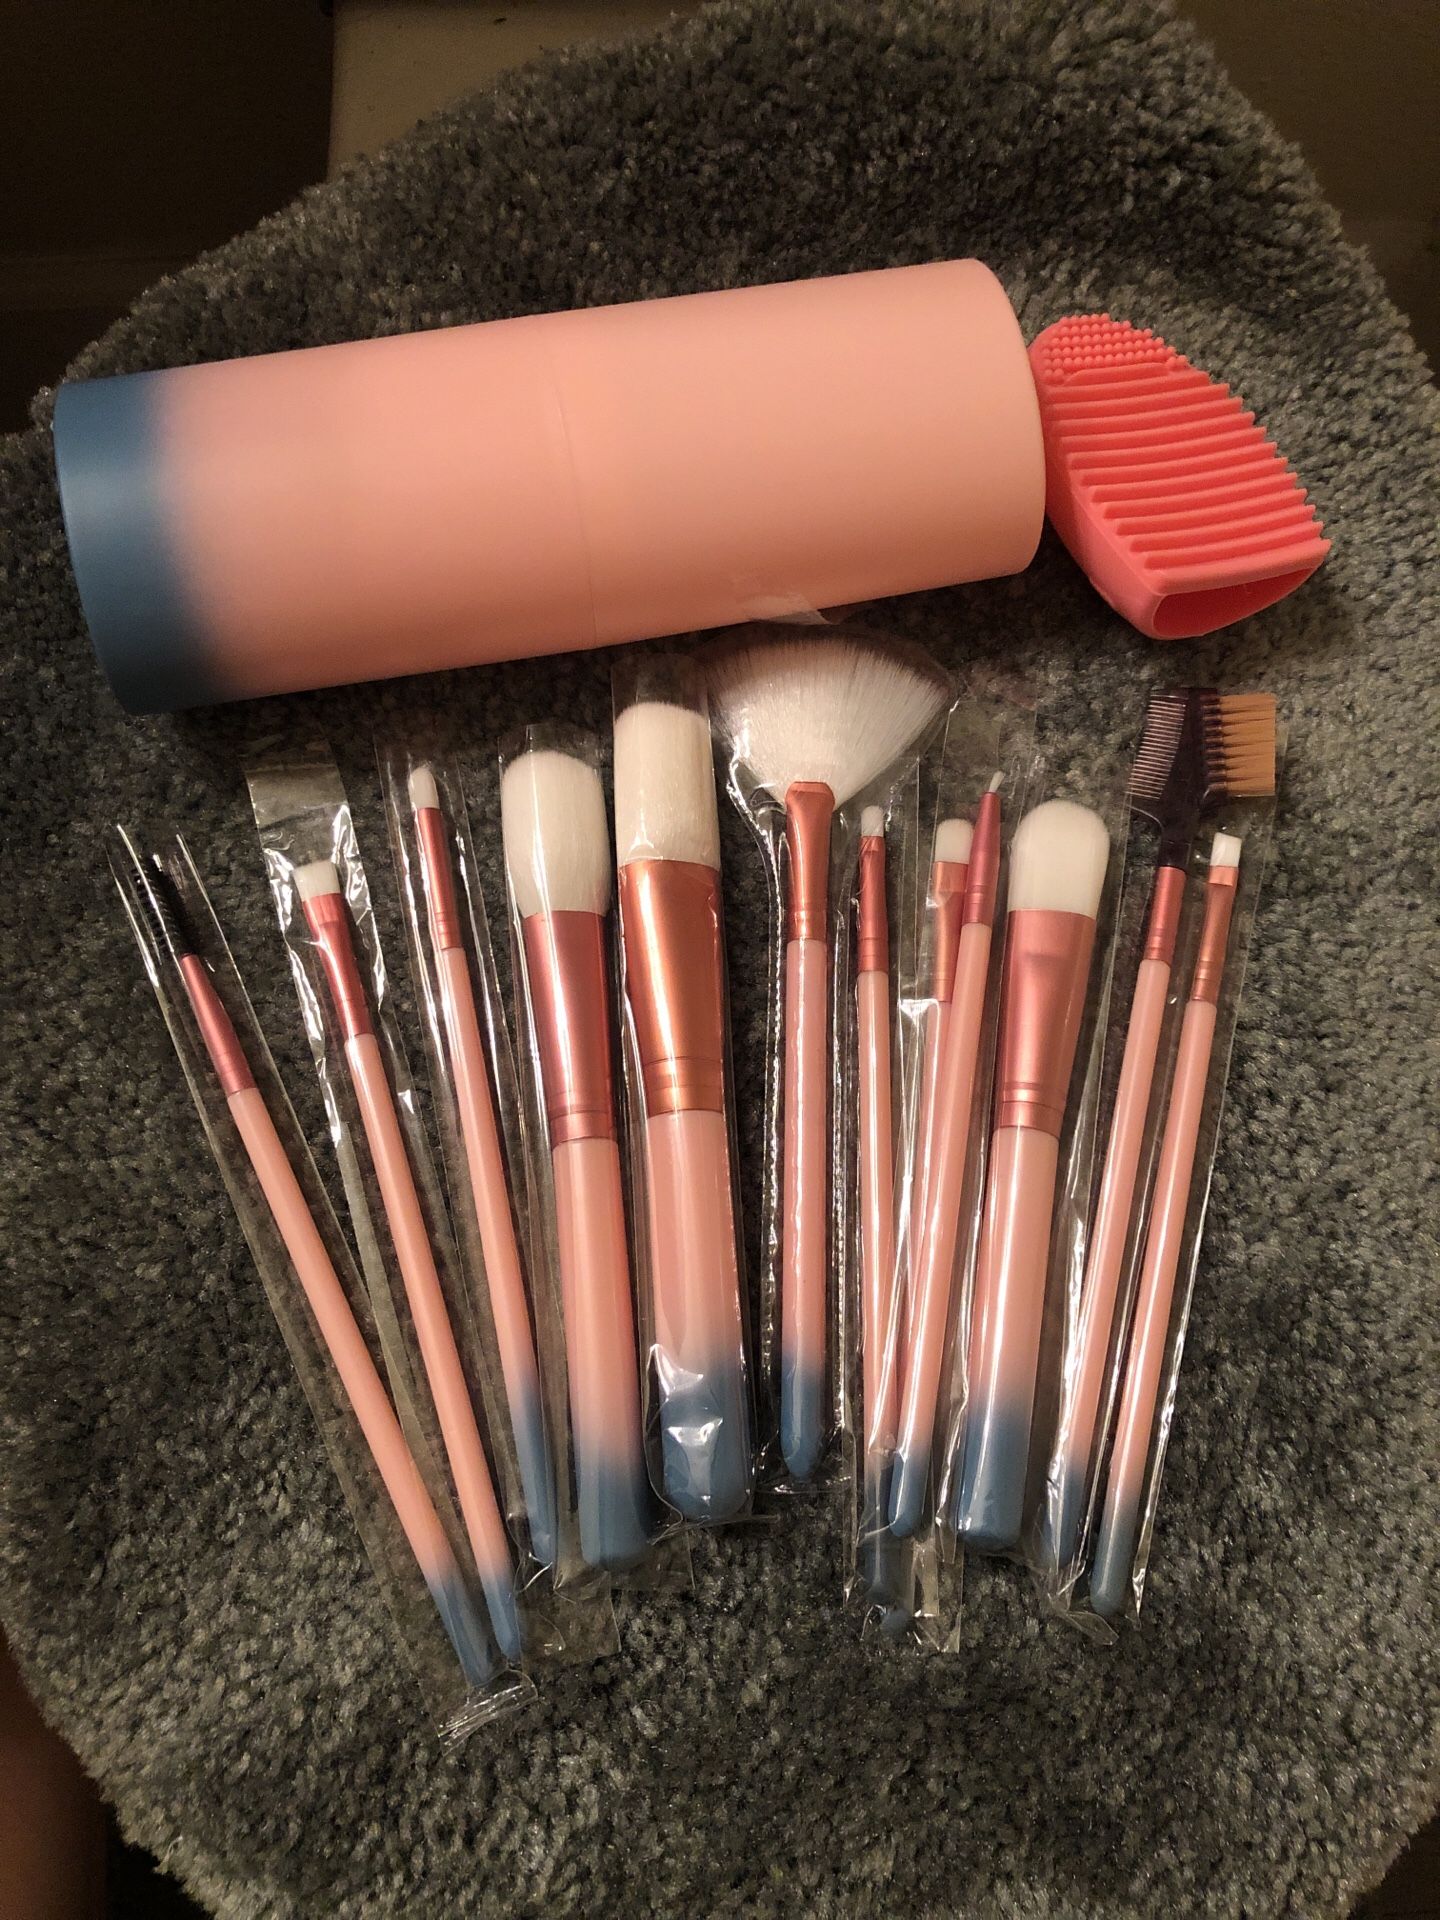 Makeup brush set of 13 with cleaner